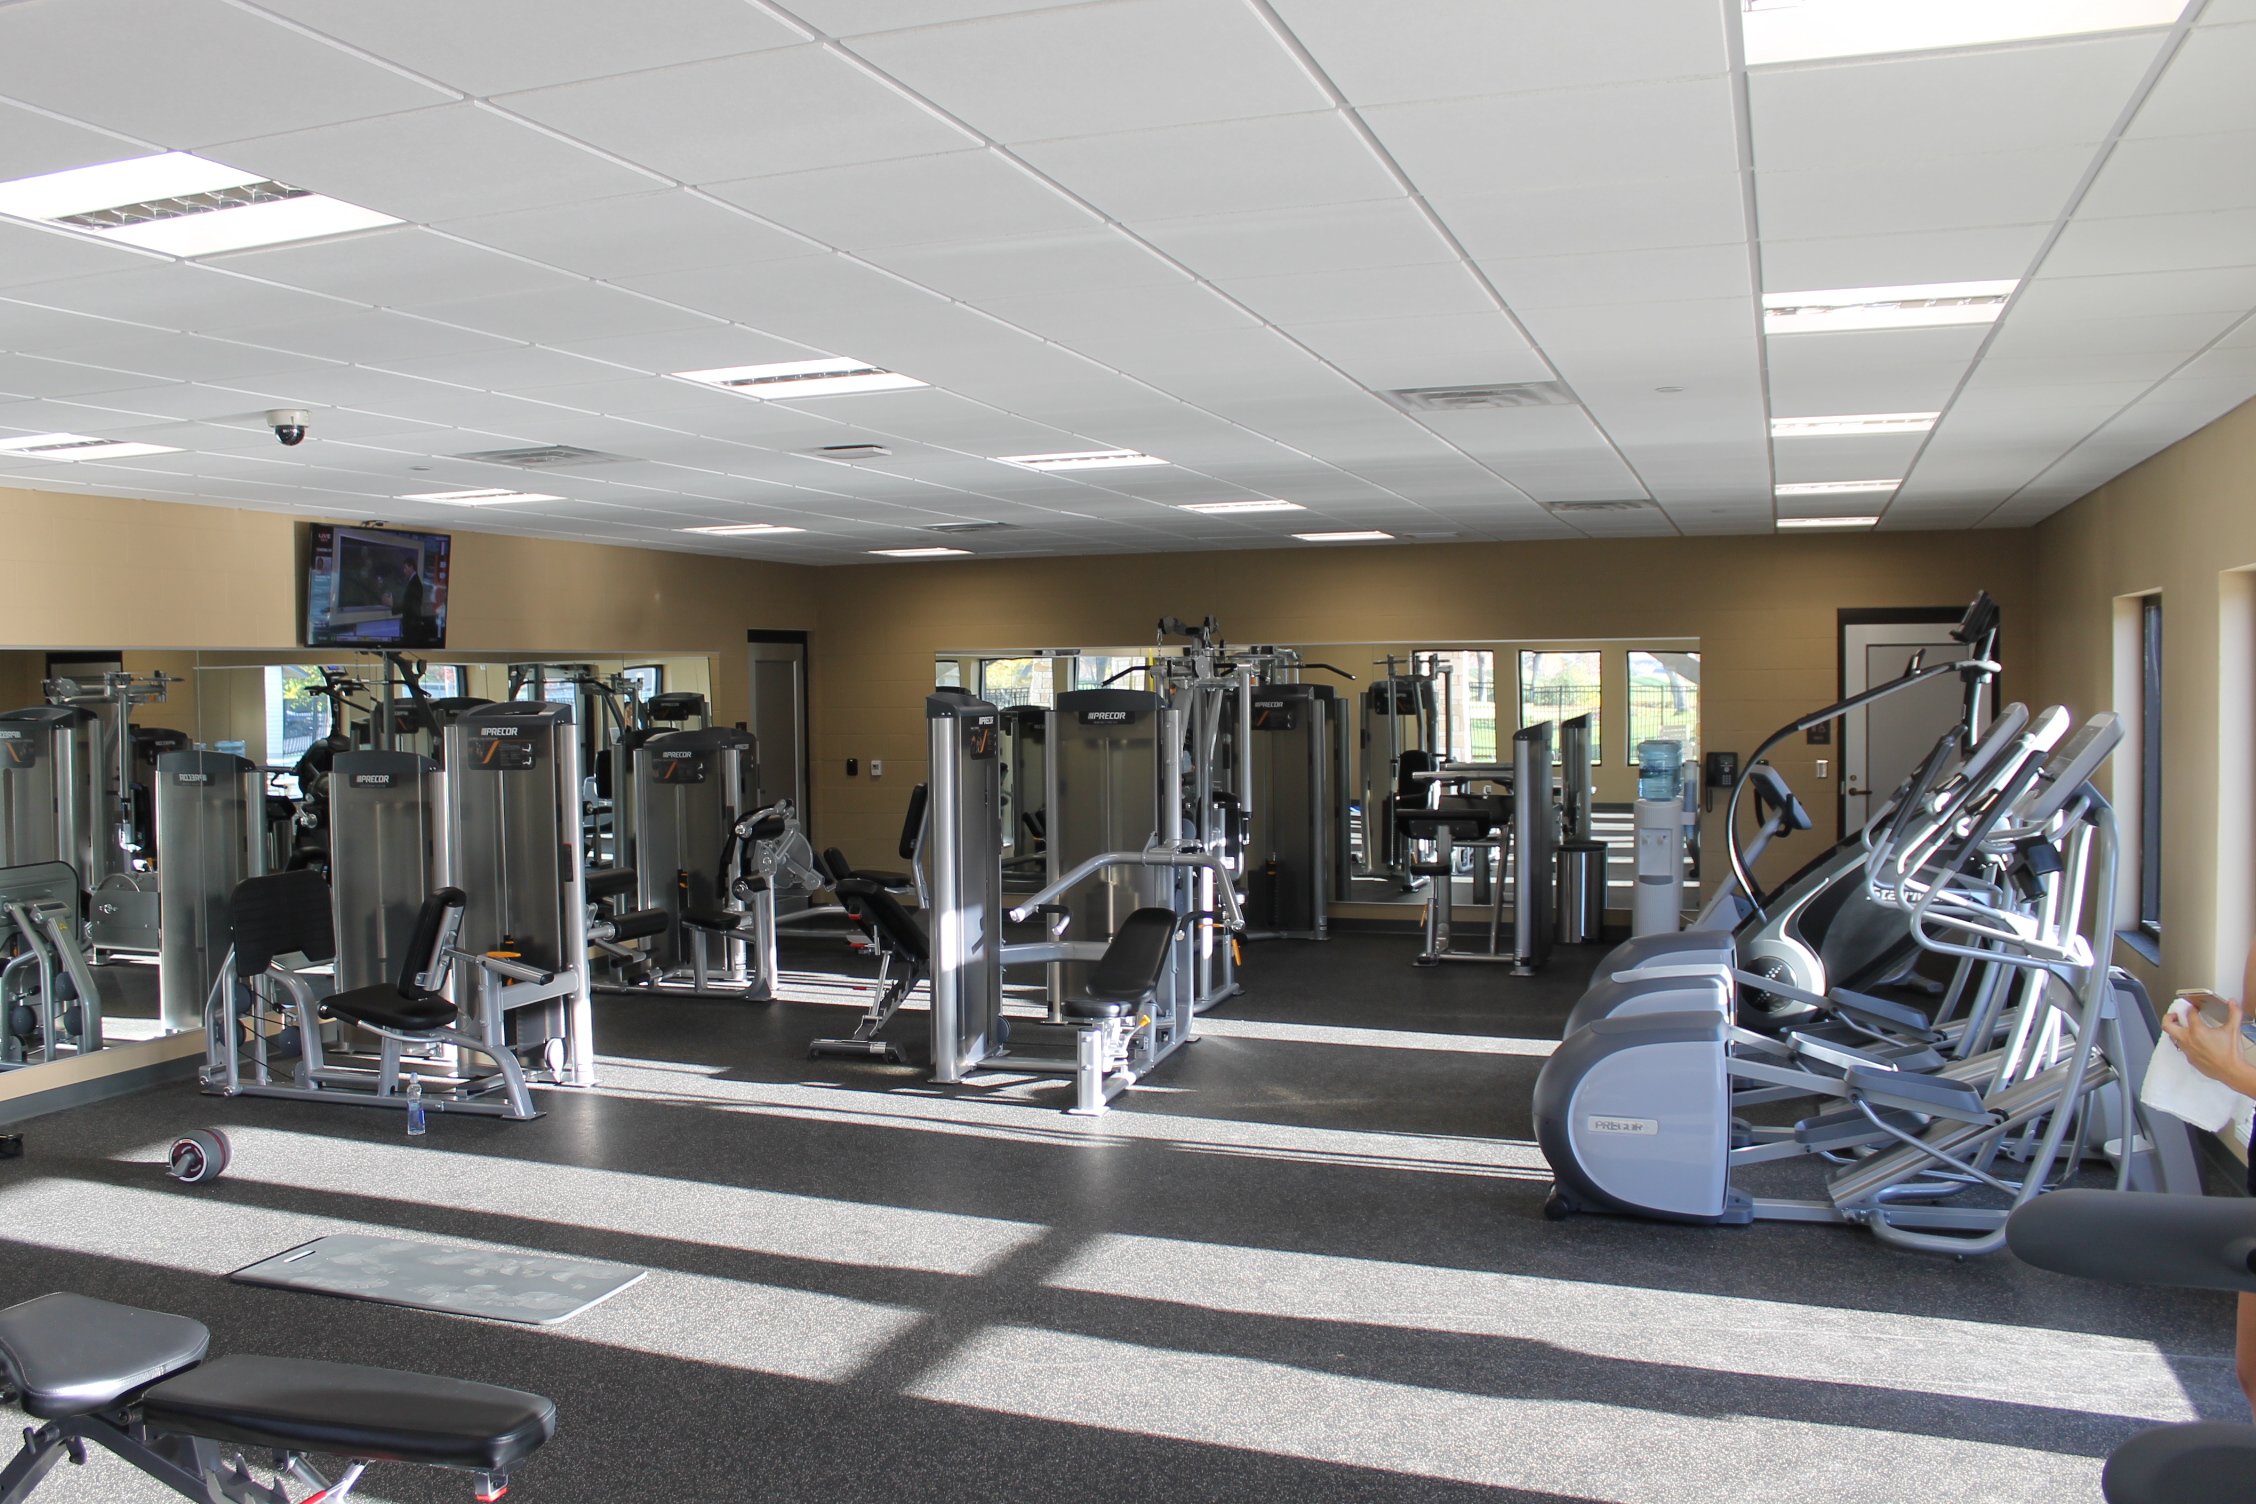 The Country Club of Sioux Falls clean living in the wellness center through cardio, personal training, therapy, special member services South Dakota